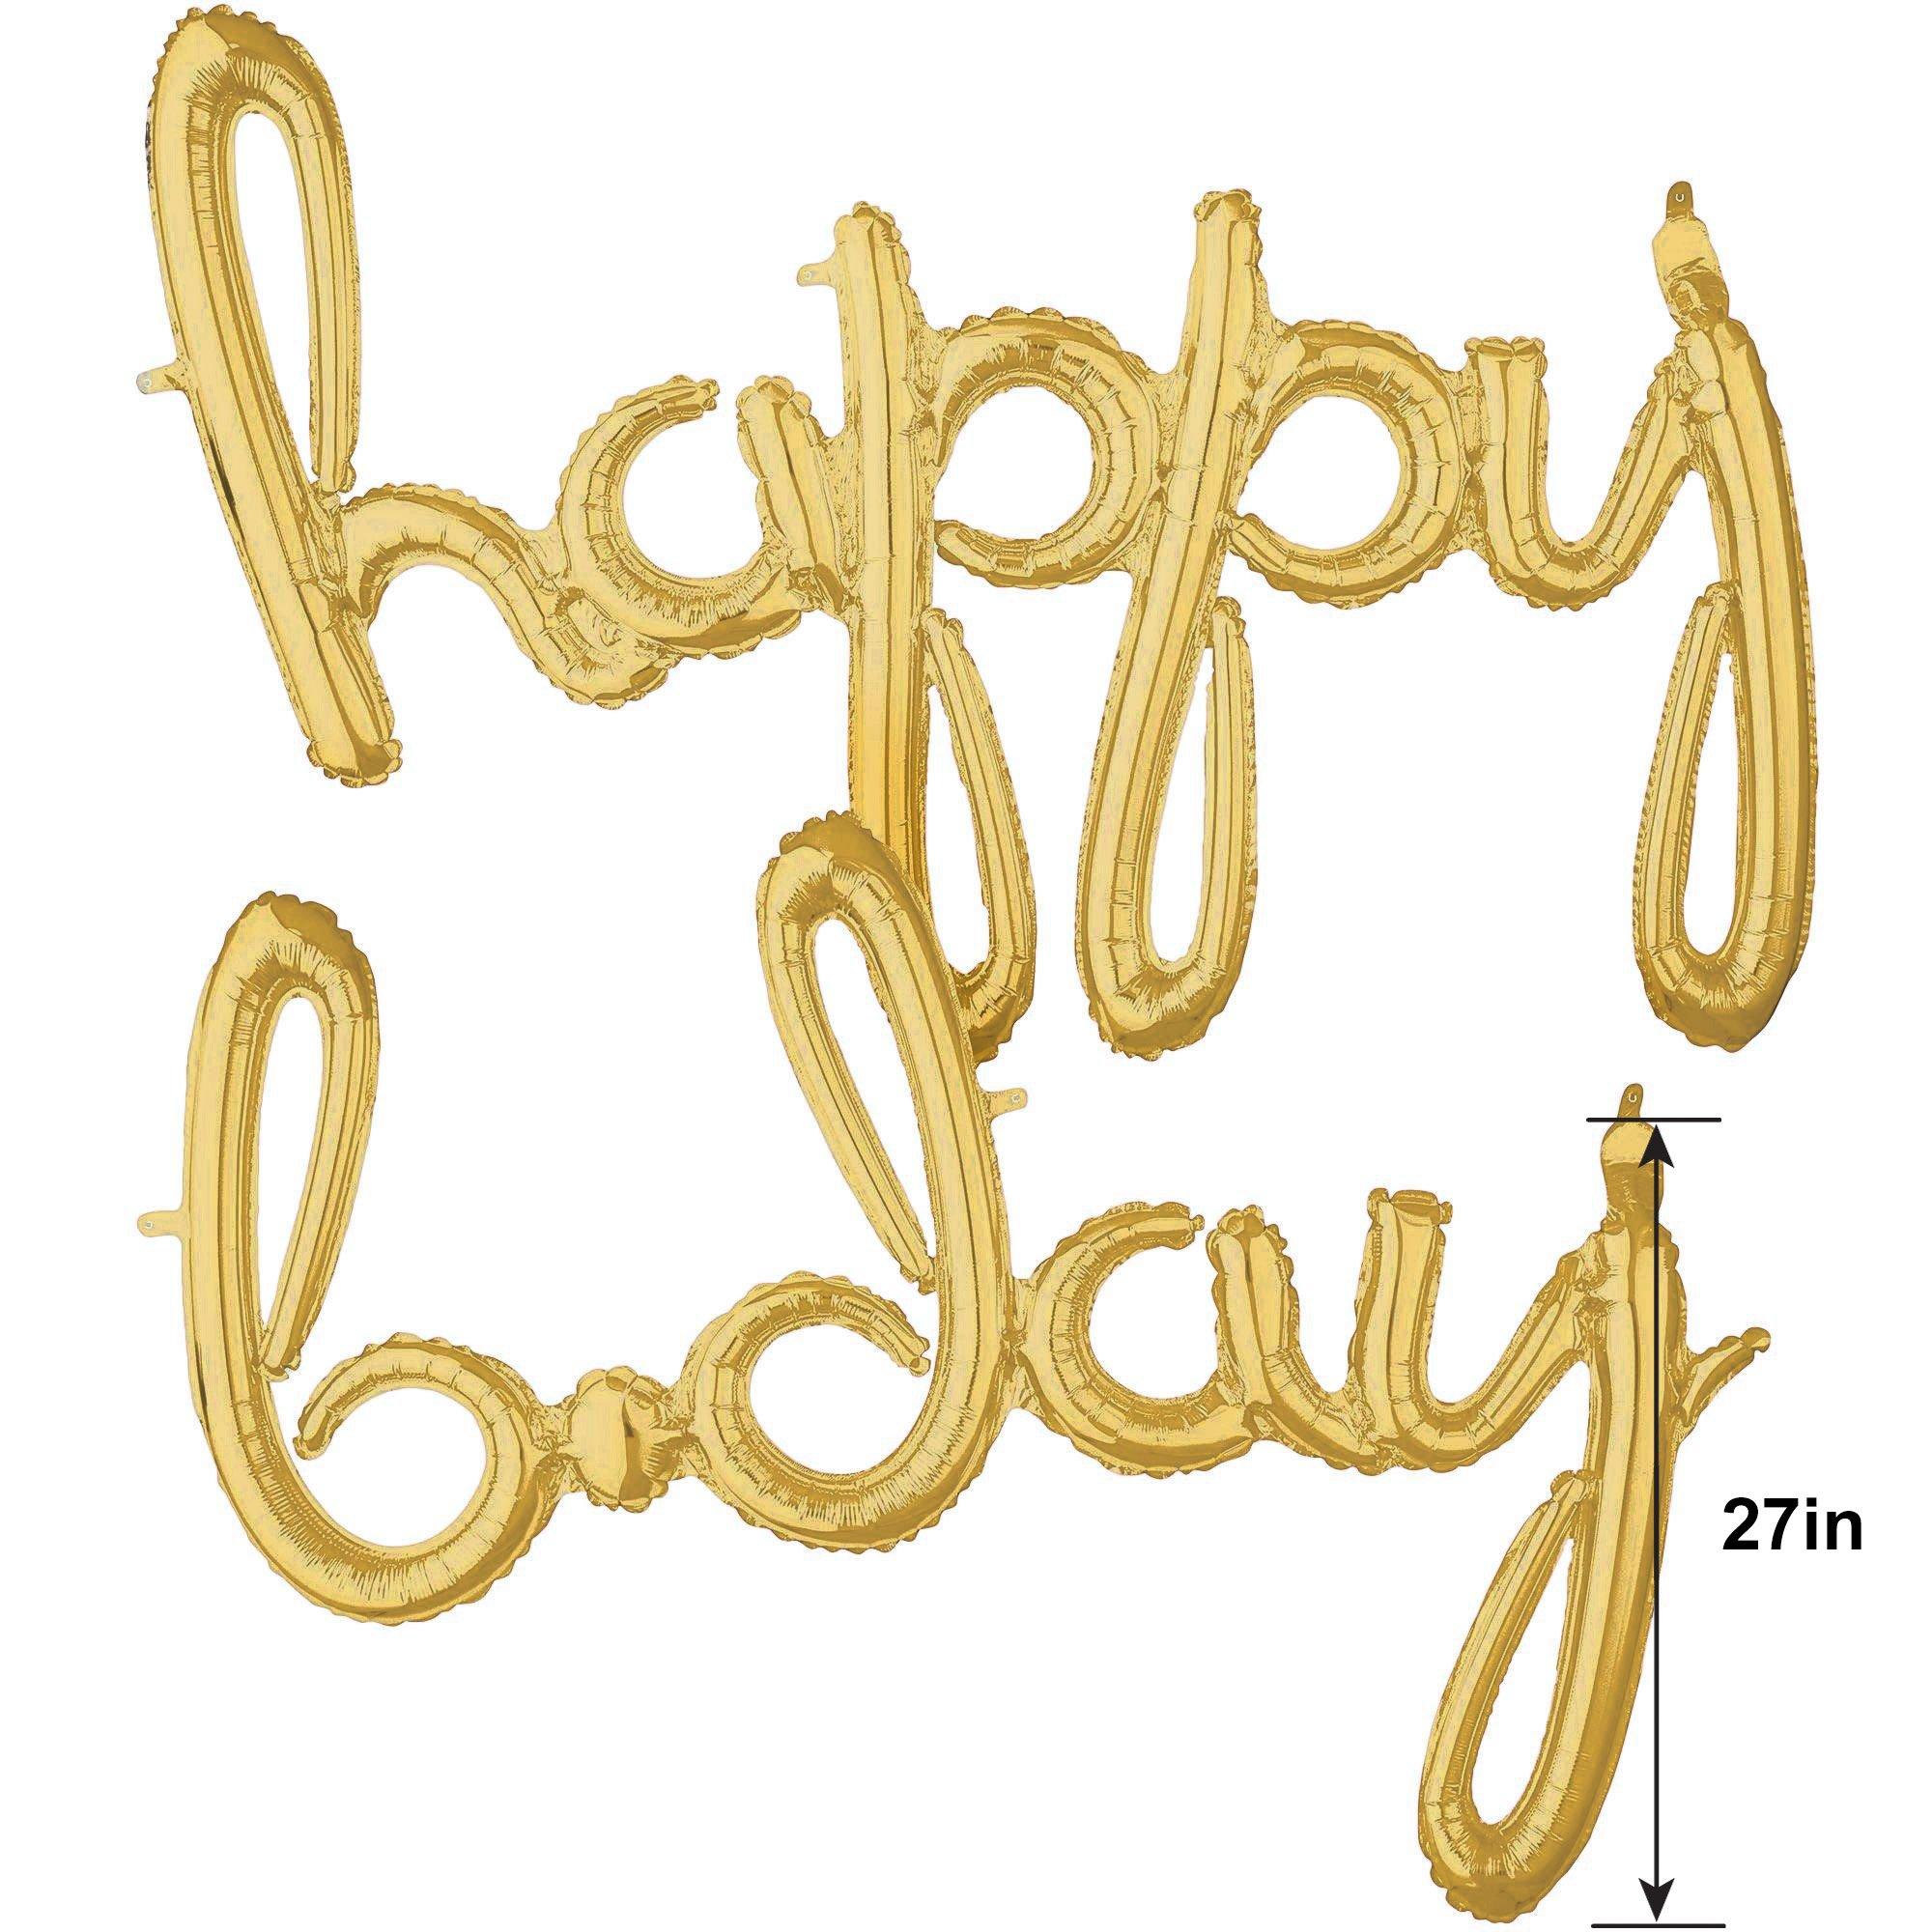 Air-Filled White Gold Happy B-Day Letter Balloon Banner, 2pc